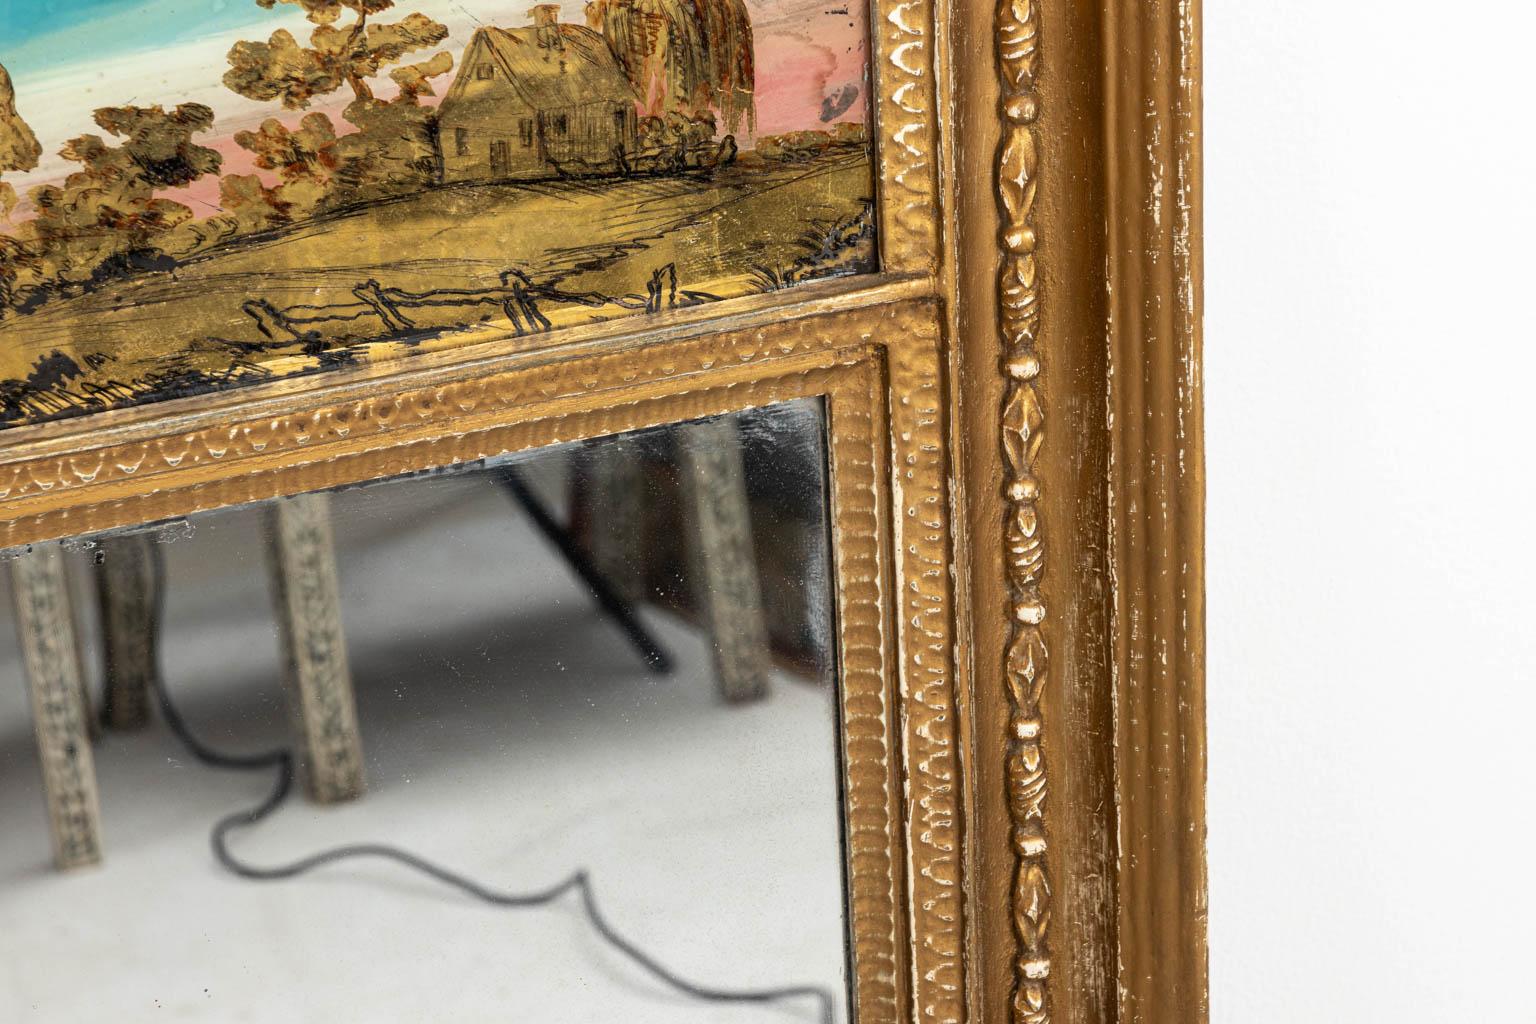 French gilt gesso mirror with églomisé glass Trumeau panel, circa 19th century. Please note of wear consistent with age including paint loss and gilt loss. There is also evidence of minor losses to the mirror plate. Made in France.